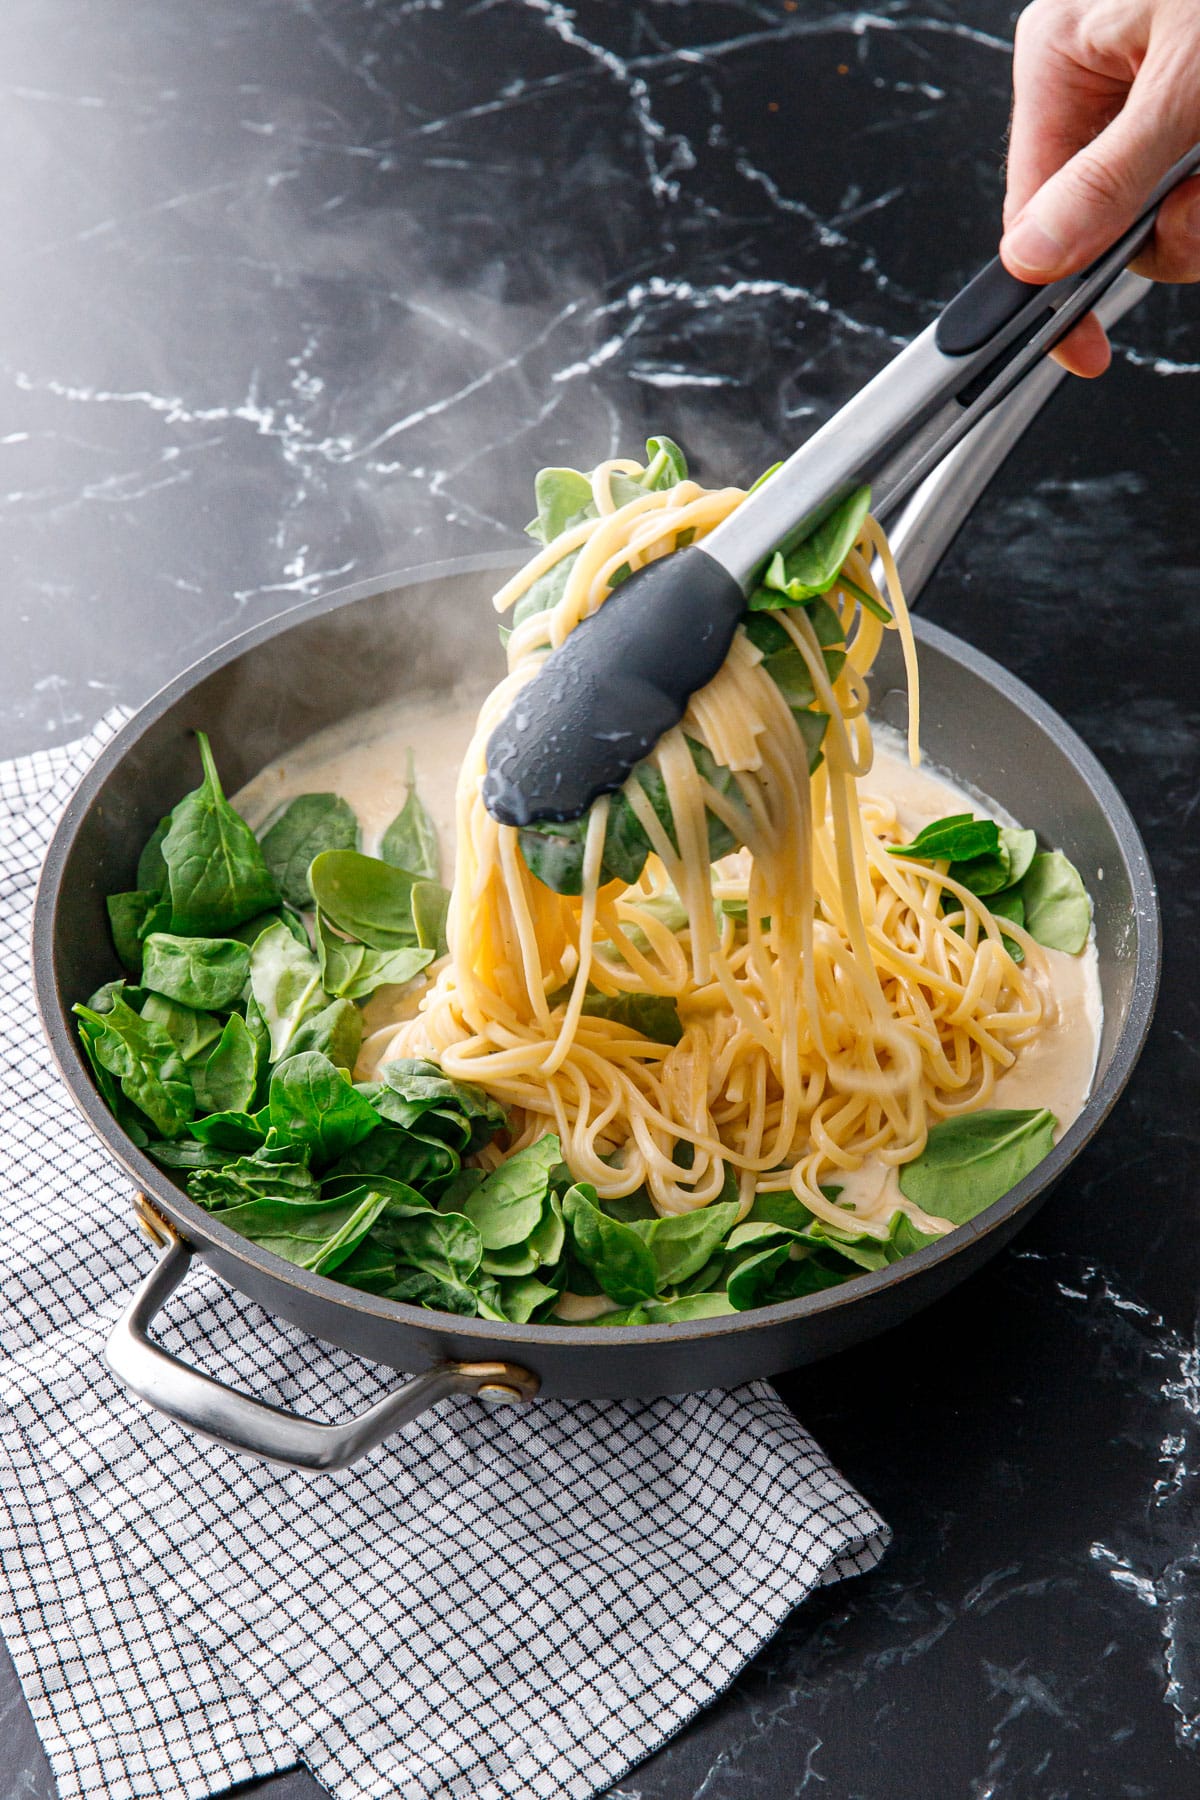 Nonstick skillet with linguine pasta and baby spinach, tongs lifting a scoop of pasta as it is stirred into the creamy sauce.